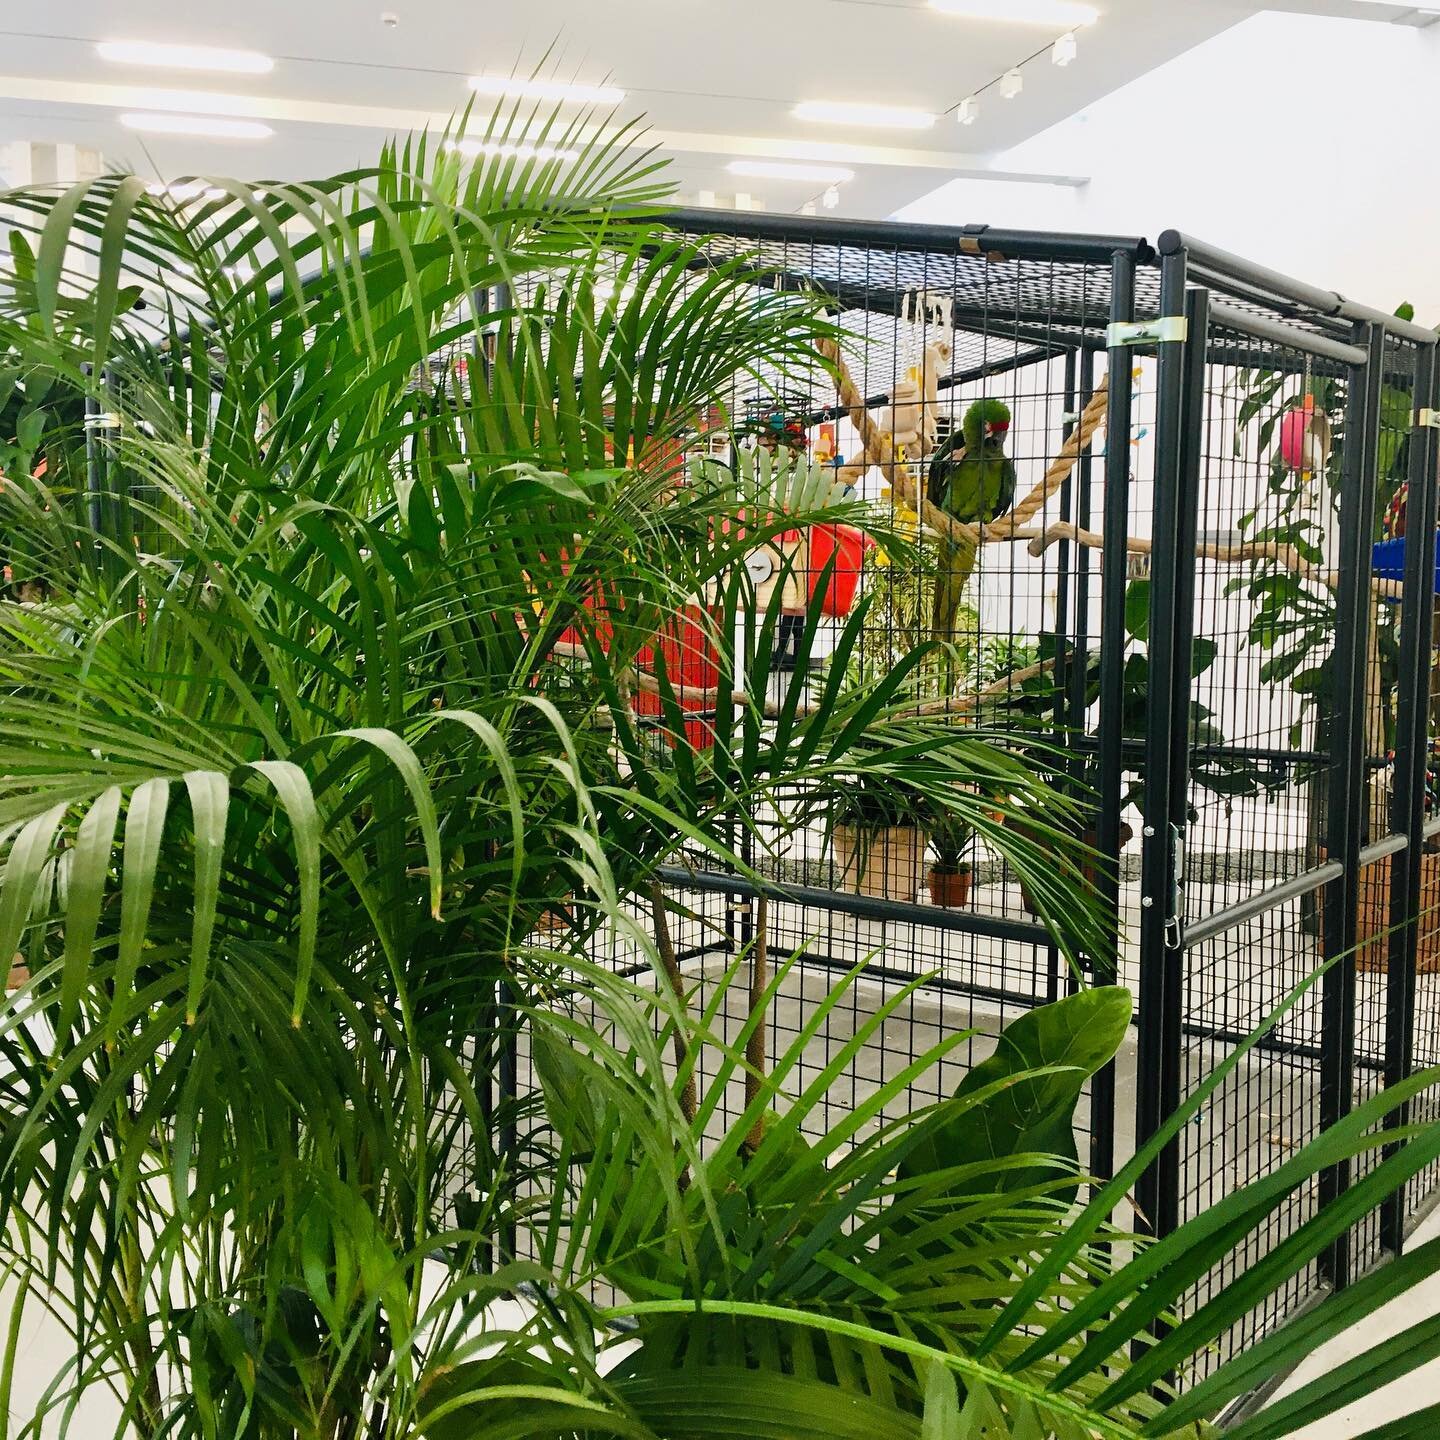 The closest we get to vacation these days is at our current Chelsea gallery tour. Walking on sand, tropical animals, monitored hurricane storms- a disguised oasis in a series of the most political exhibitions we&rsquo;ve seen in Chelsea in a while. J